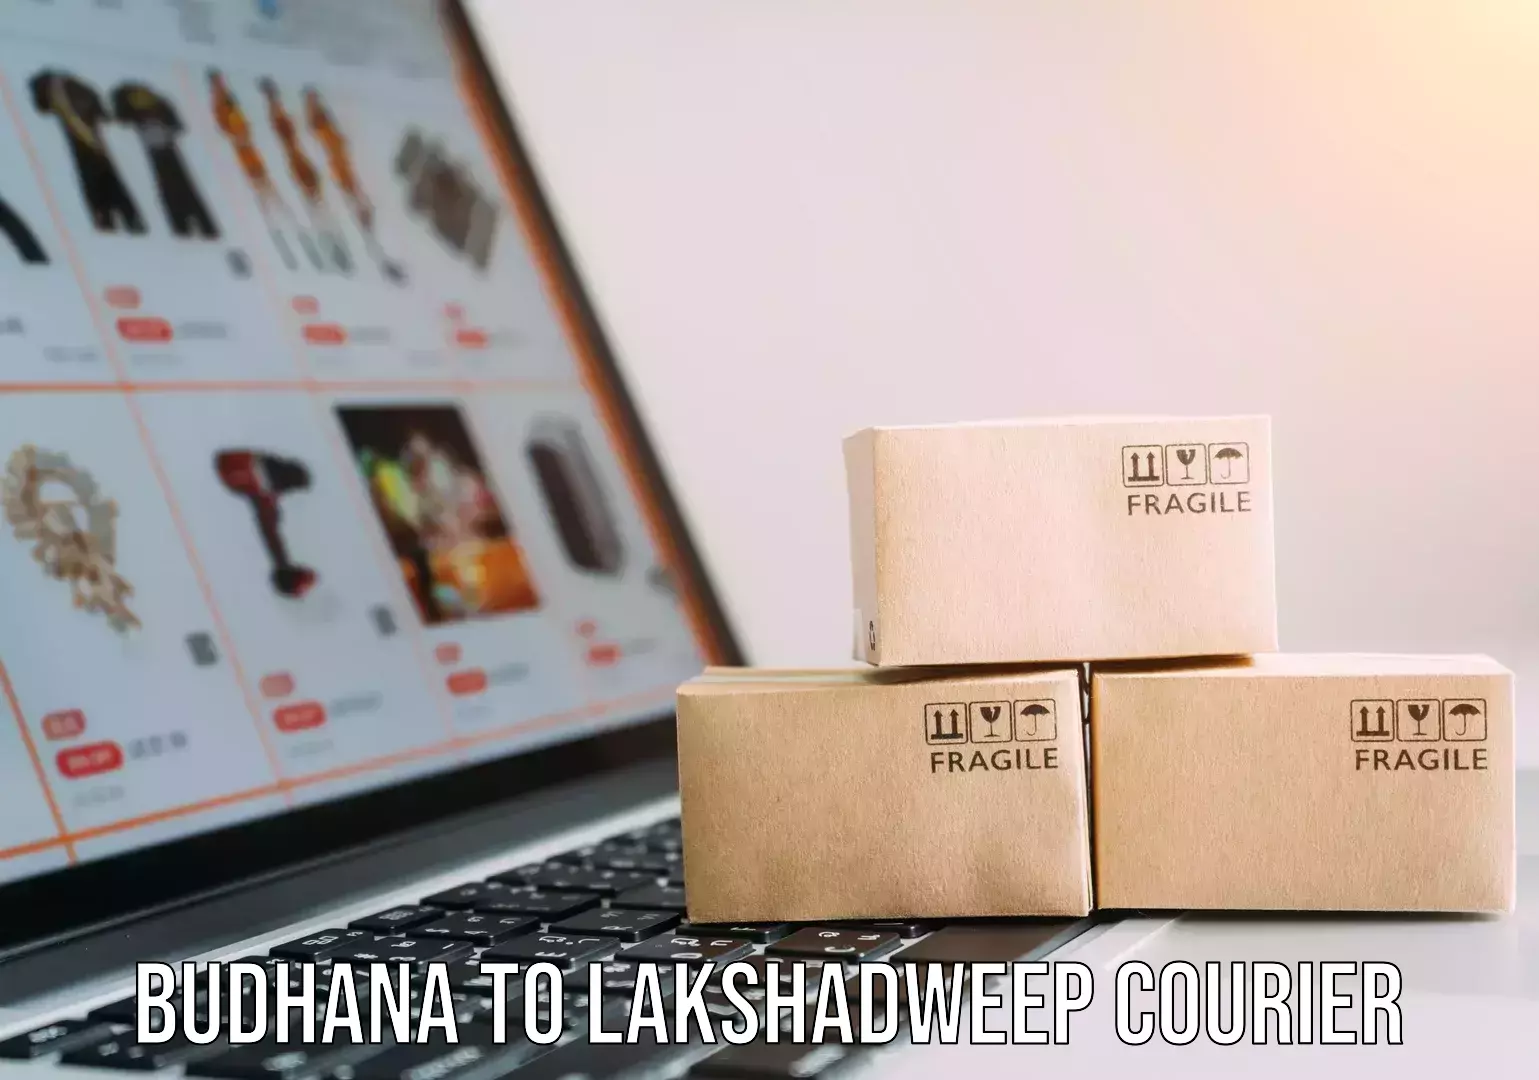 State-of-the-art courier technology Budhana to Lakshadweep